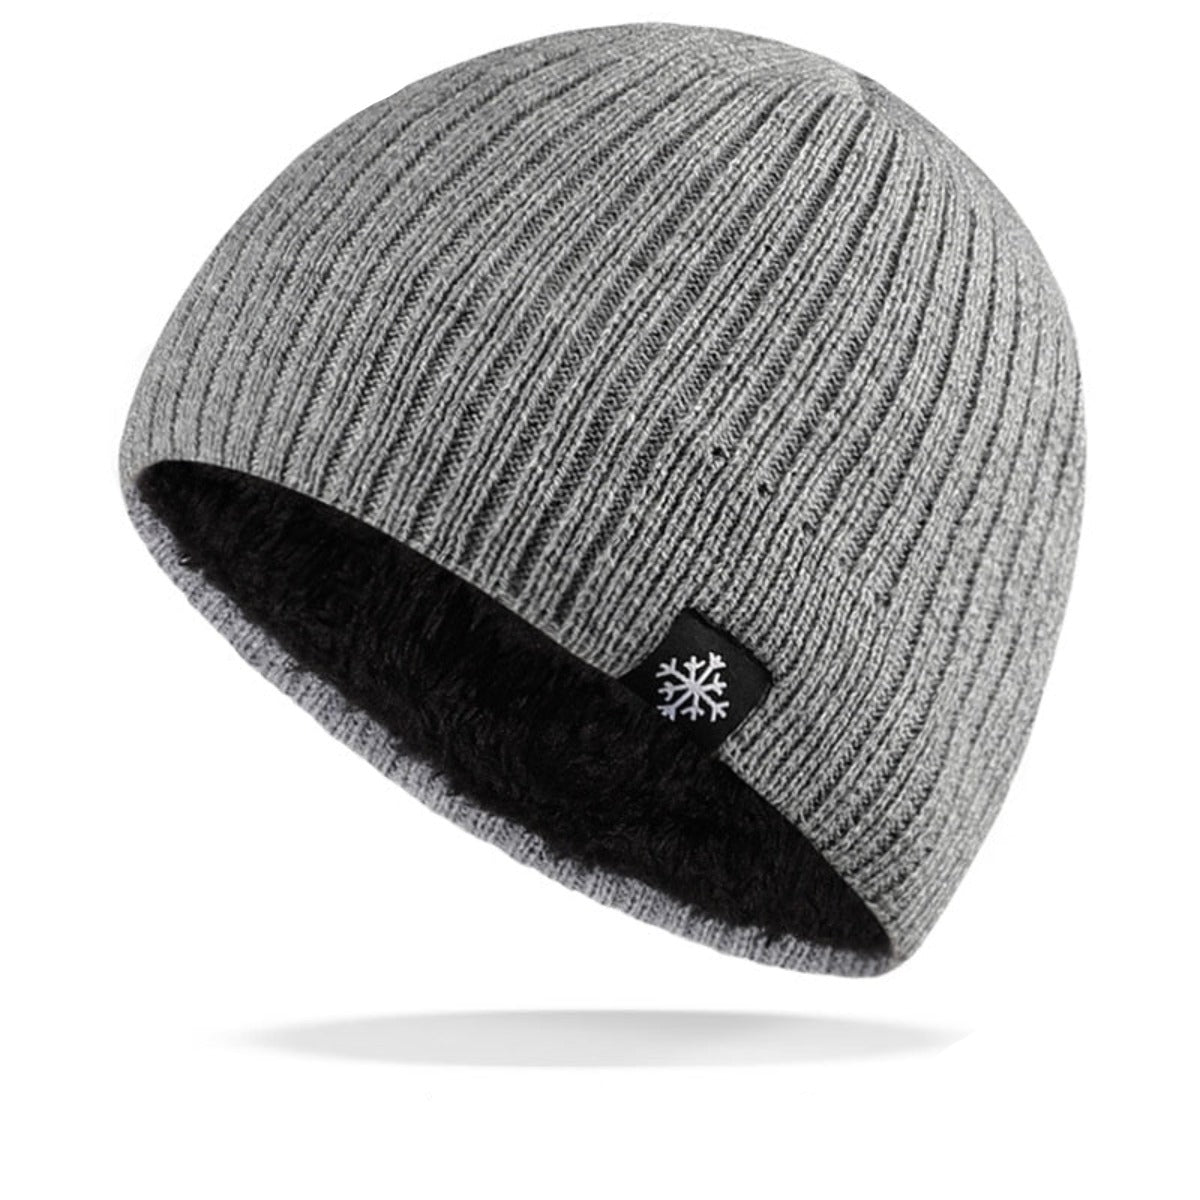 A soft and warm grey Knitted Winter Beanie Hat on a white background.